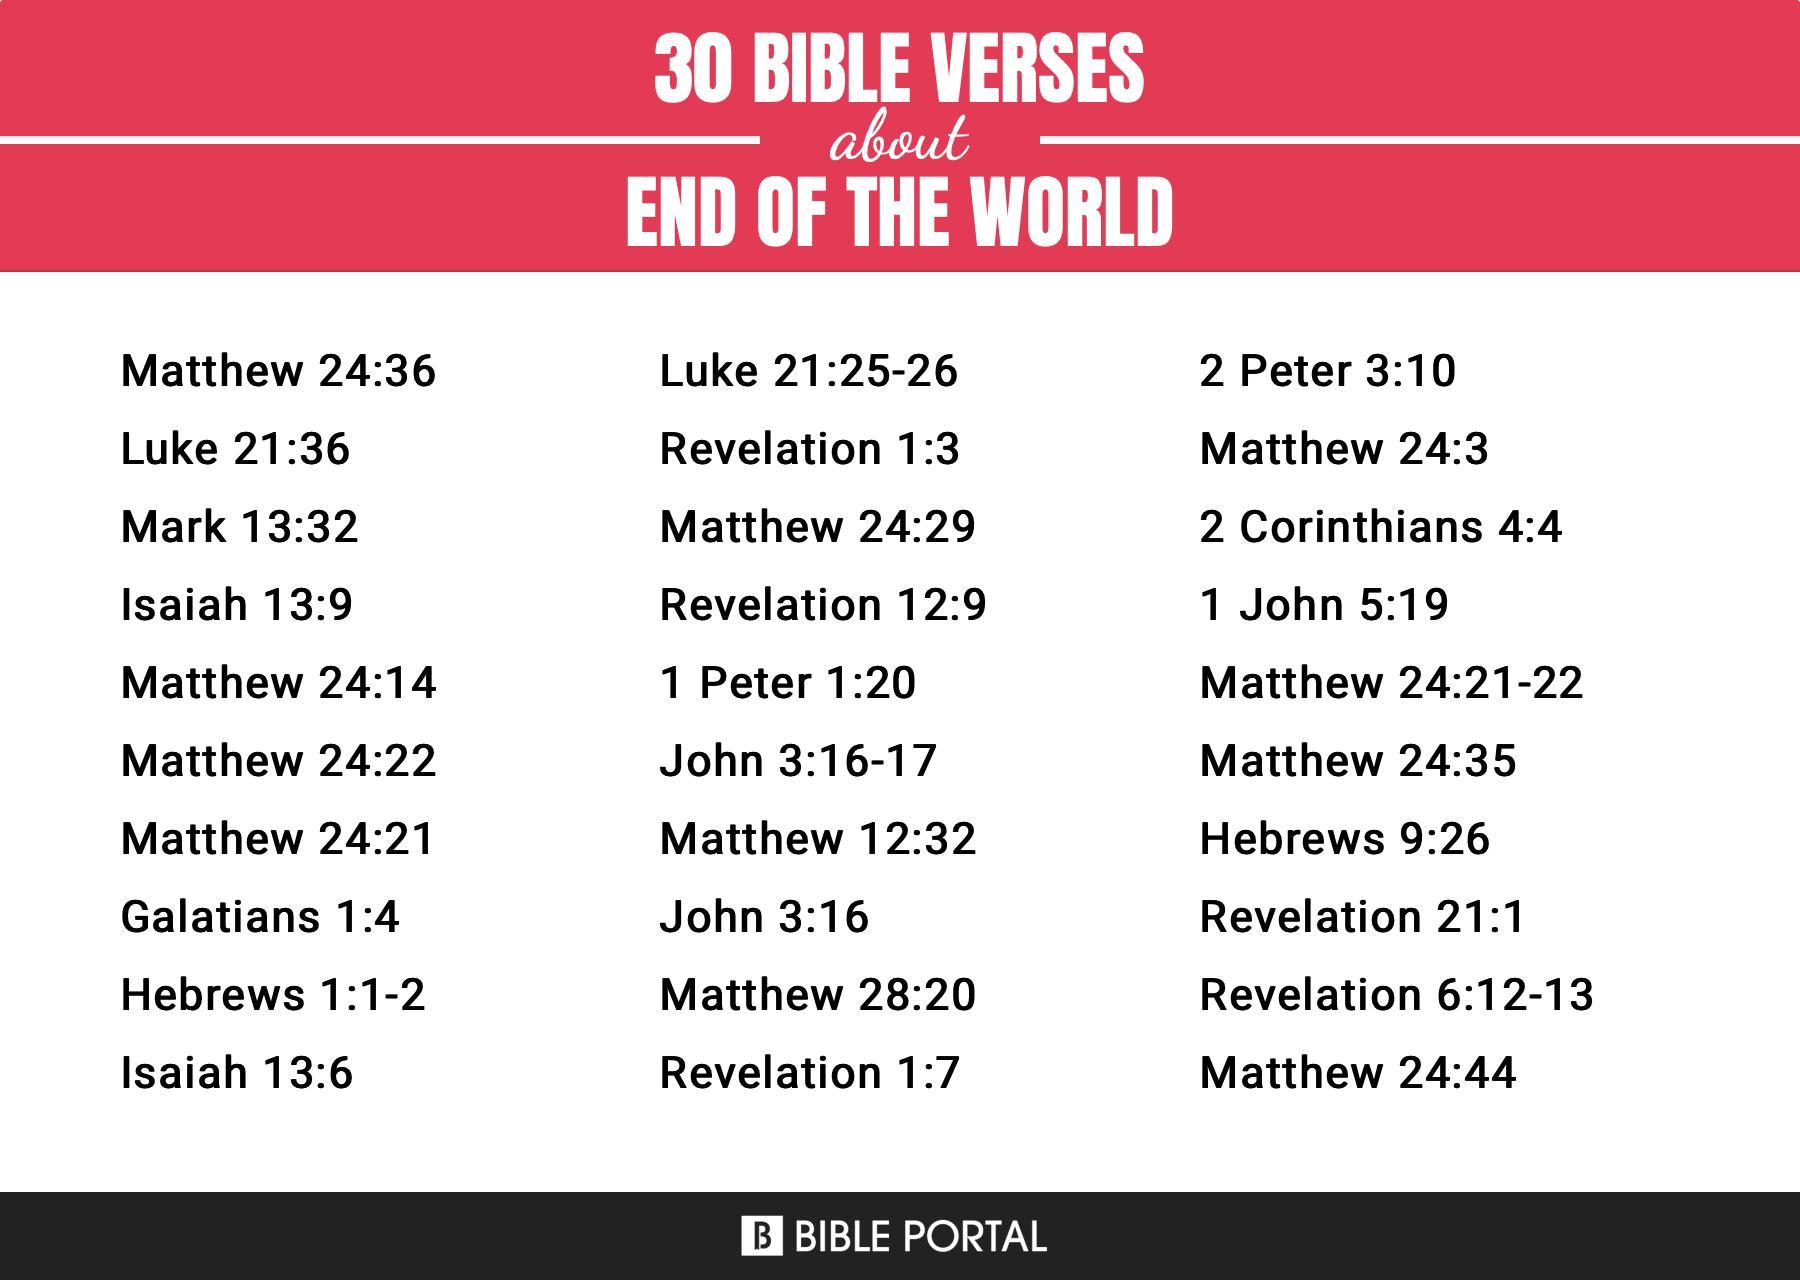 What Does the Bible Say about End Of The World?